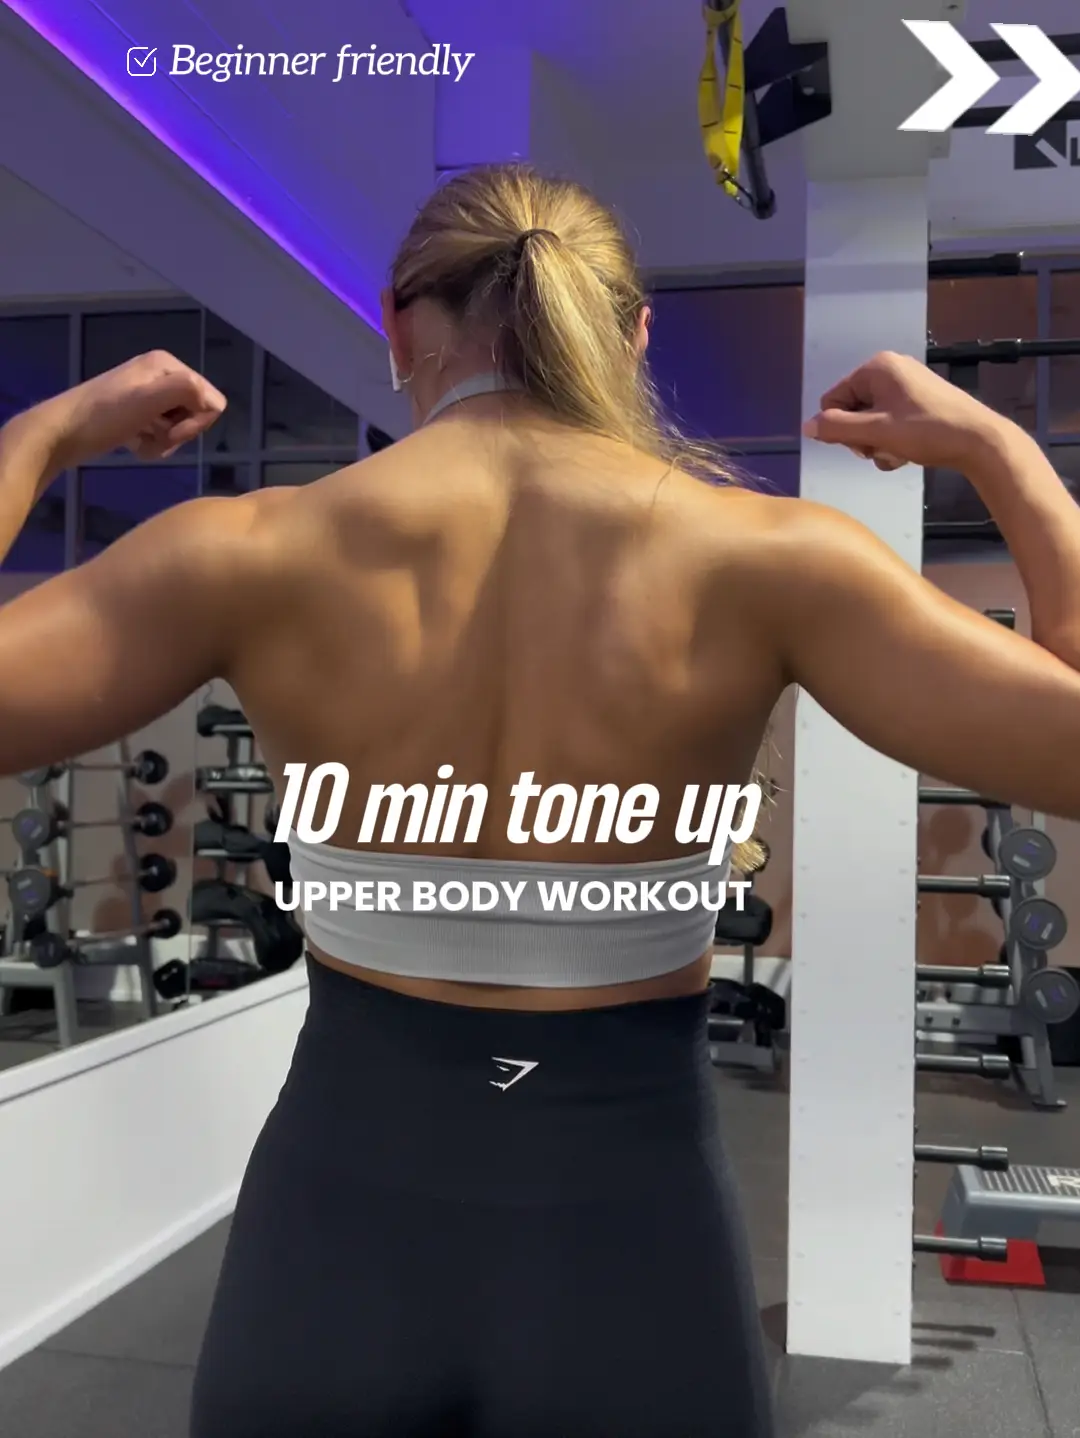 10 minute upper body tone up workout 💪🏽, Video published by Ezara Mae